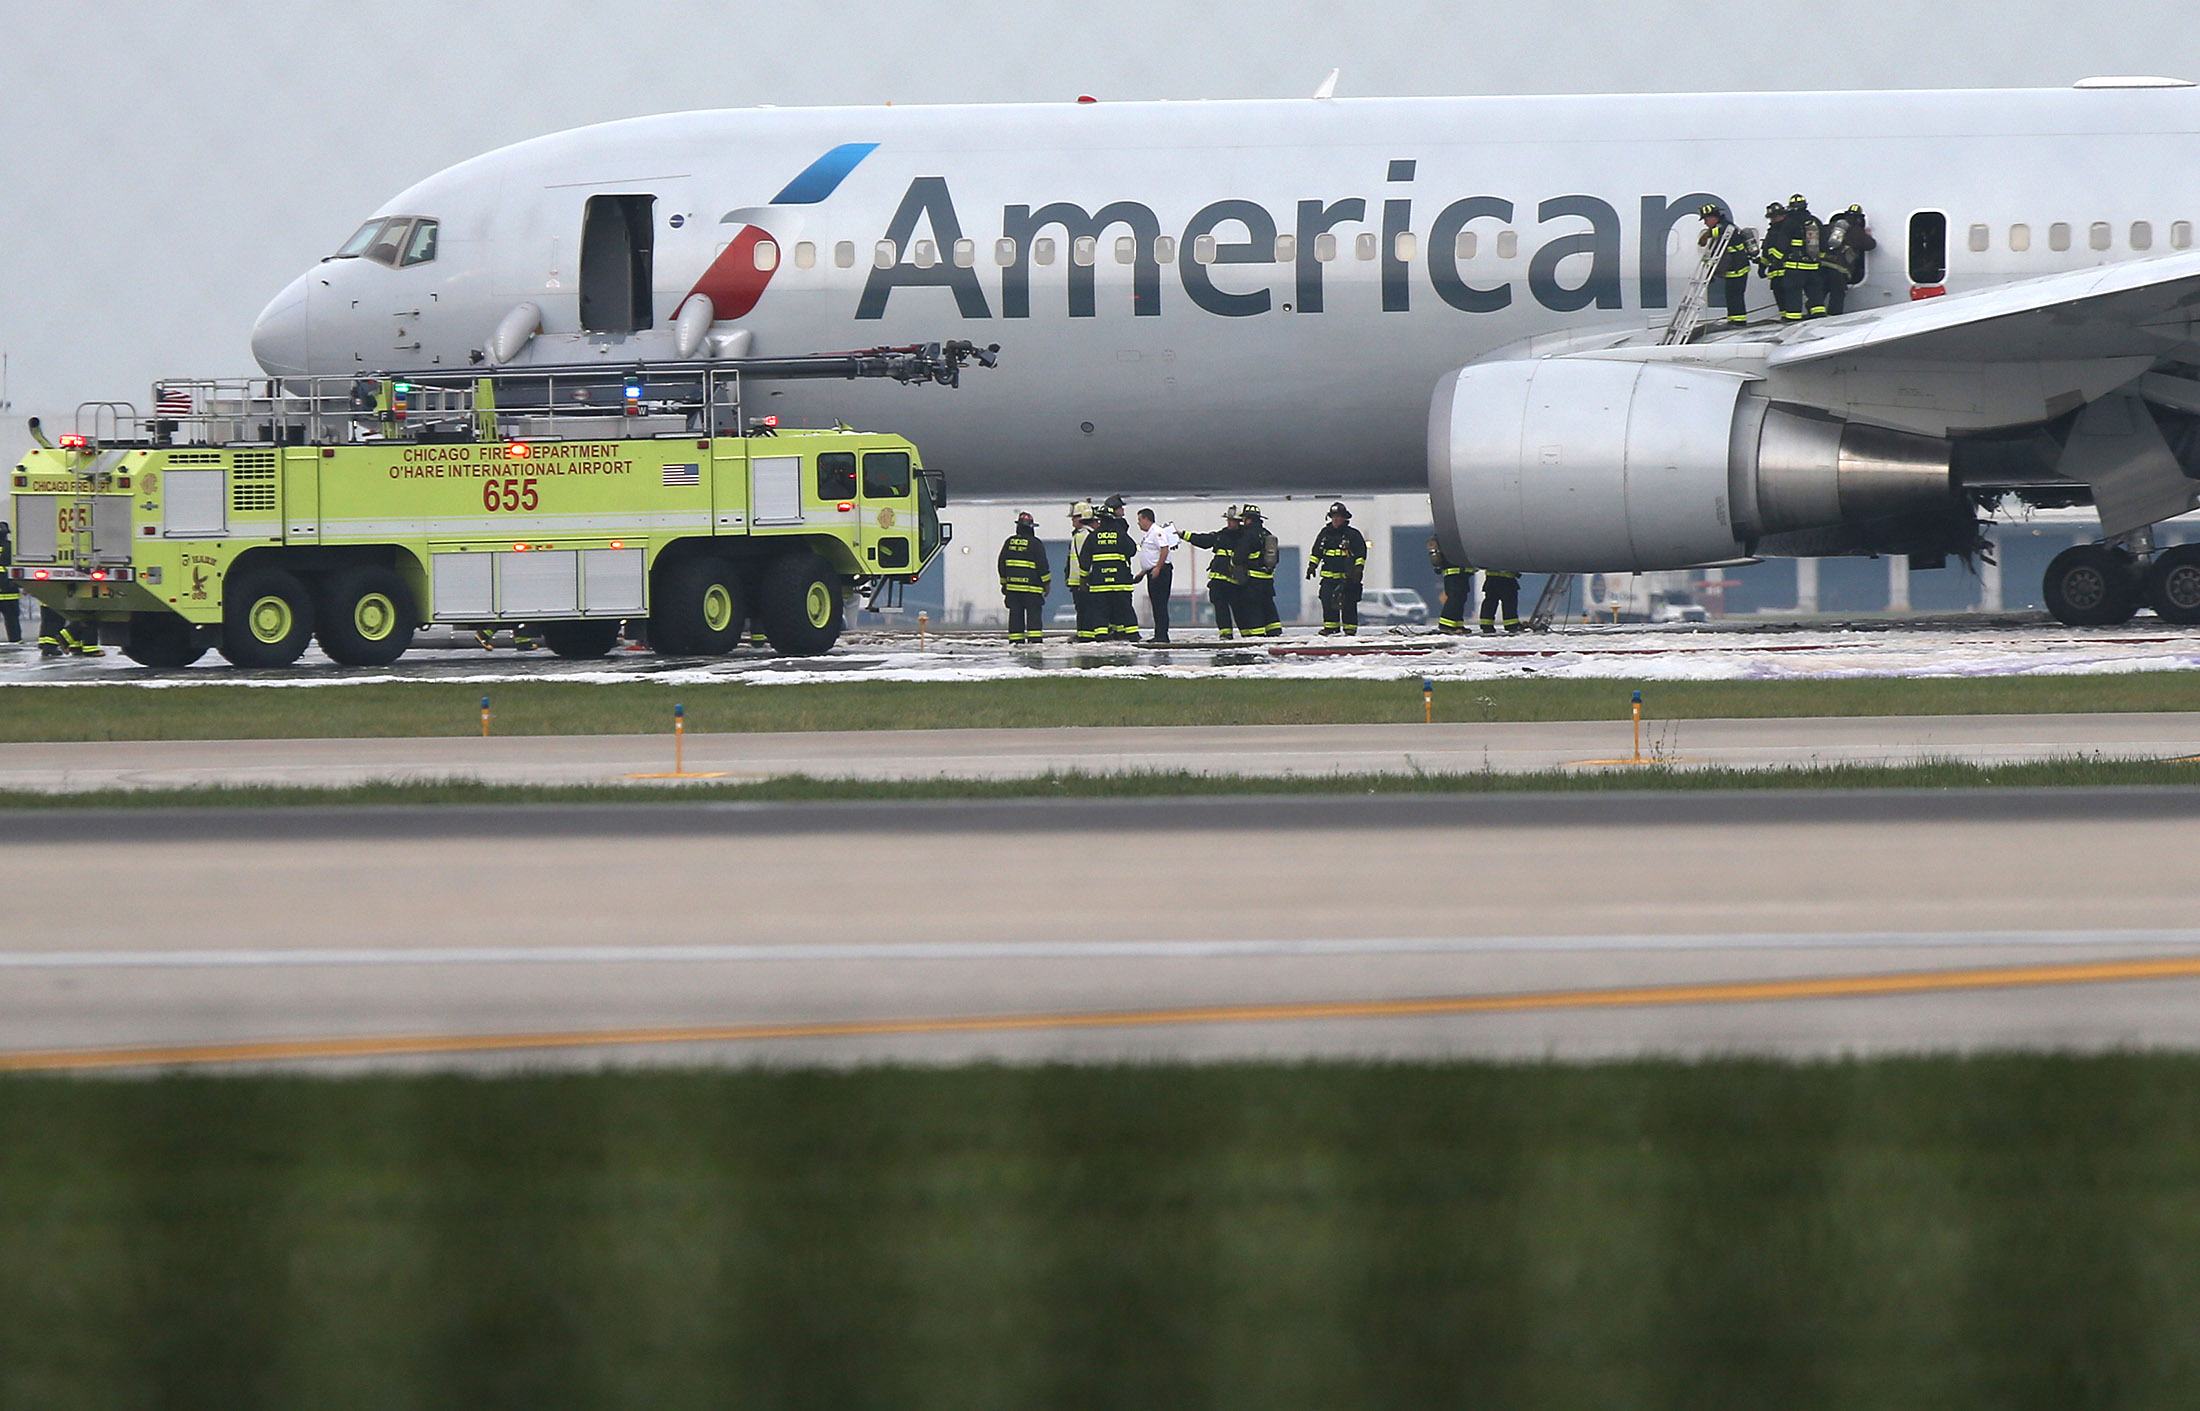 Firefighters extinguish flames from American Airlines Flight which caught fire on a runway at O'Hare International Airport in Chicago on Oct. 28, 2016.
